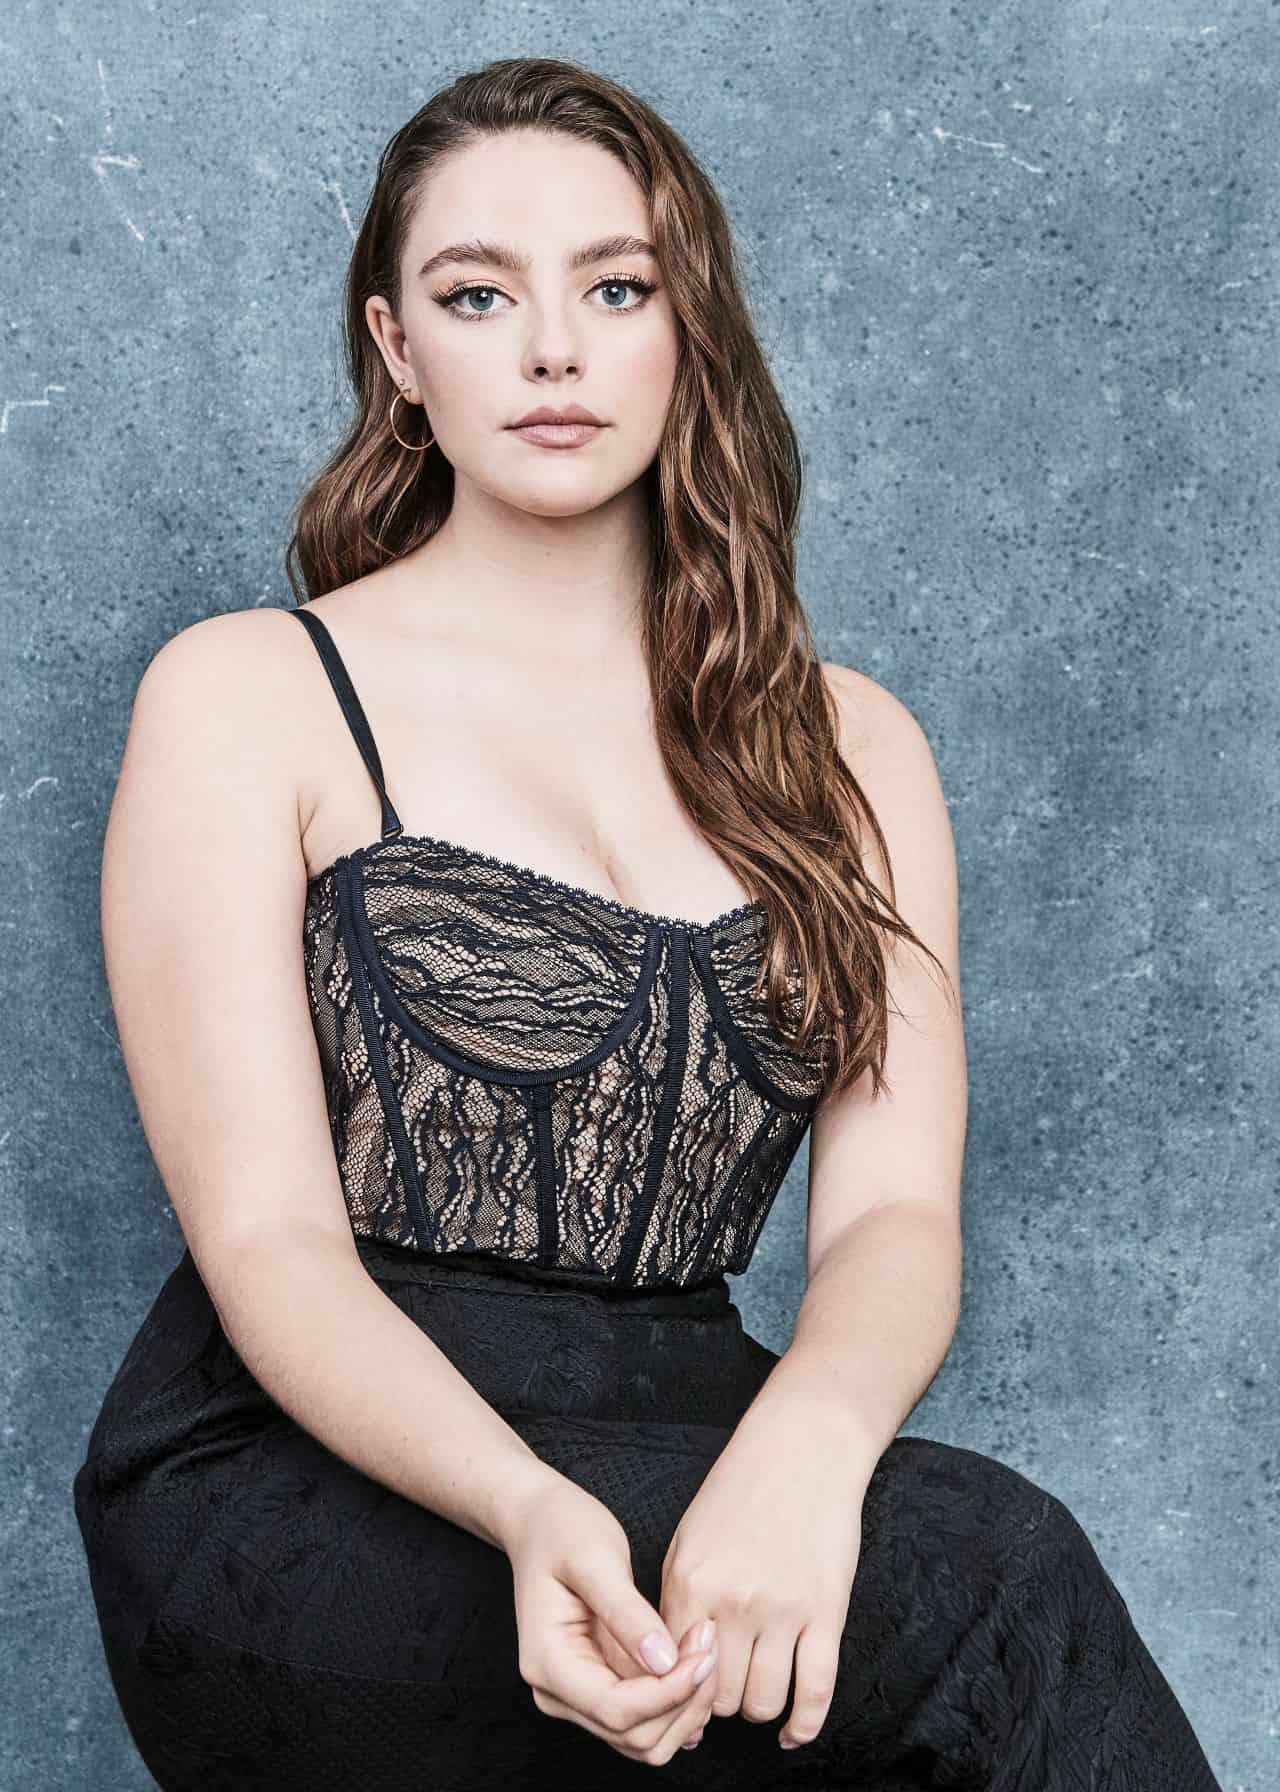 Danielle rose russell porn